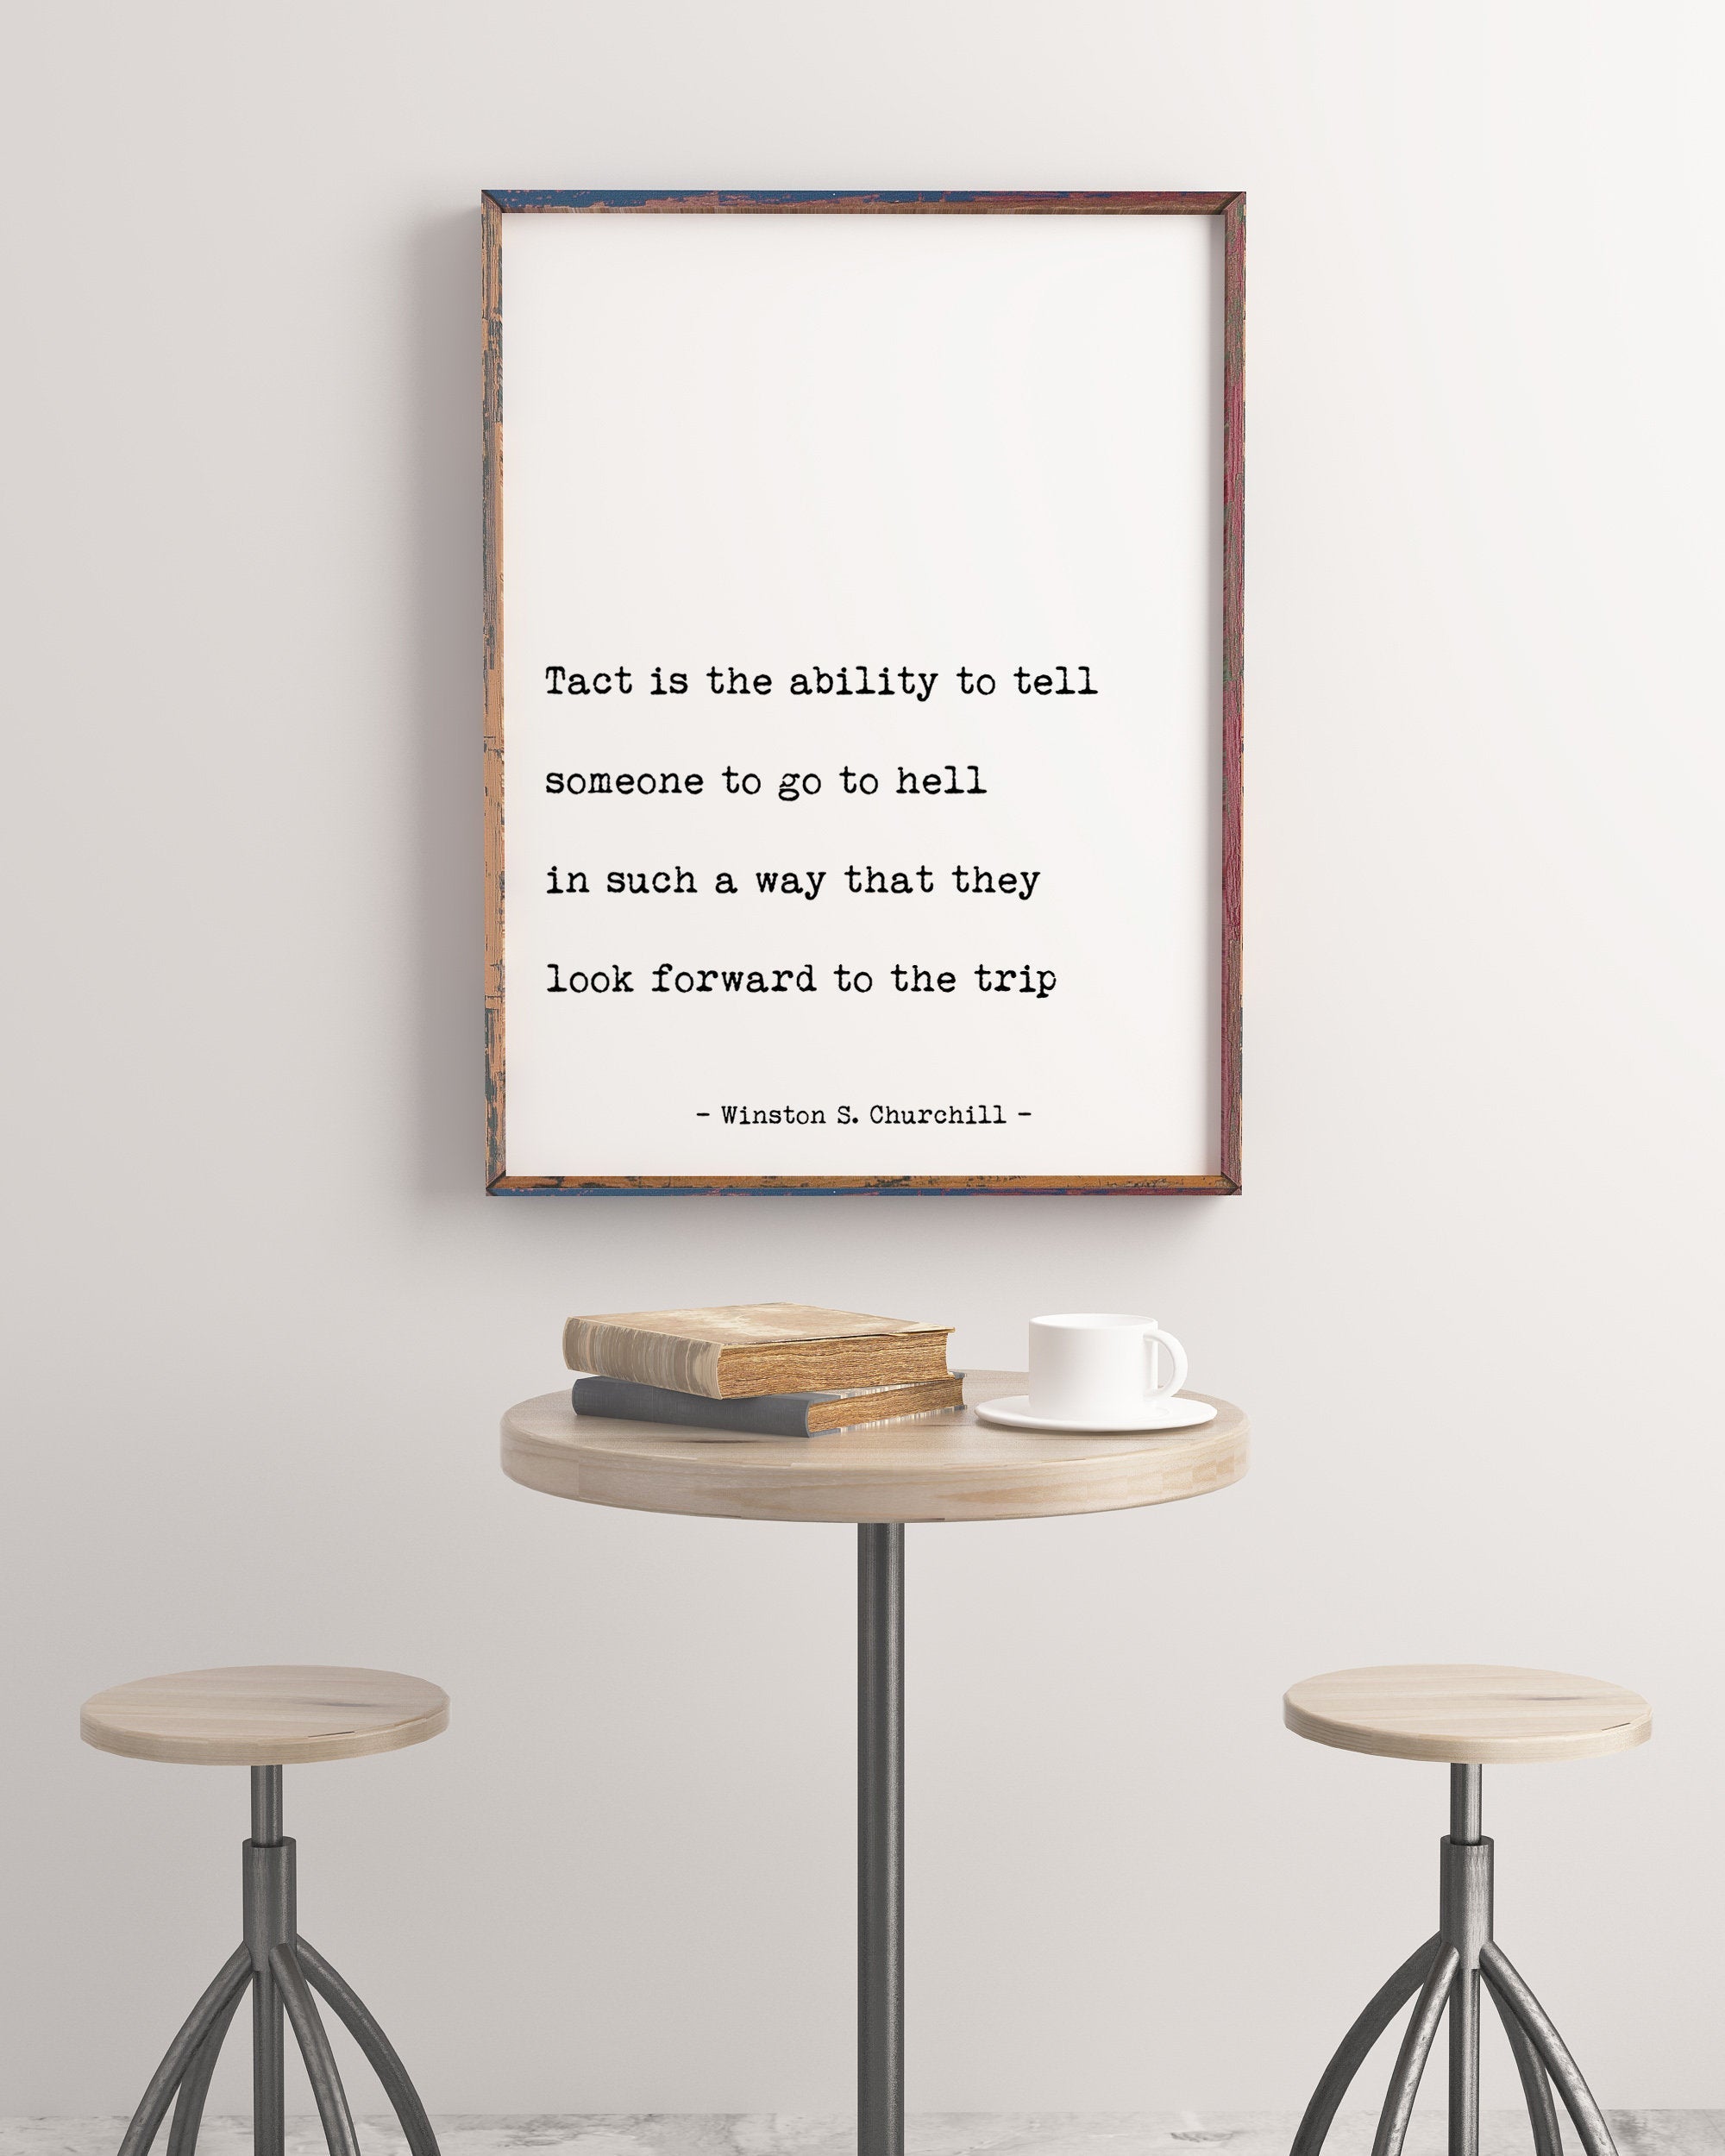 Winston Churchill Quote Print, Tact Is The Ability To Tell Someone To Go To Hell Life Quote Minimalist Art Inspirational Unframed wall art - BookQuoteDecor